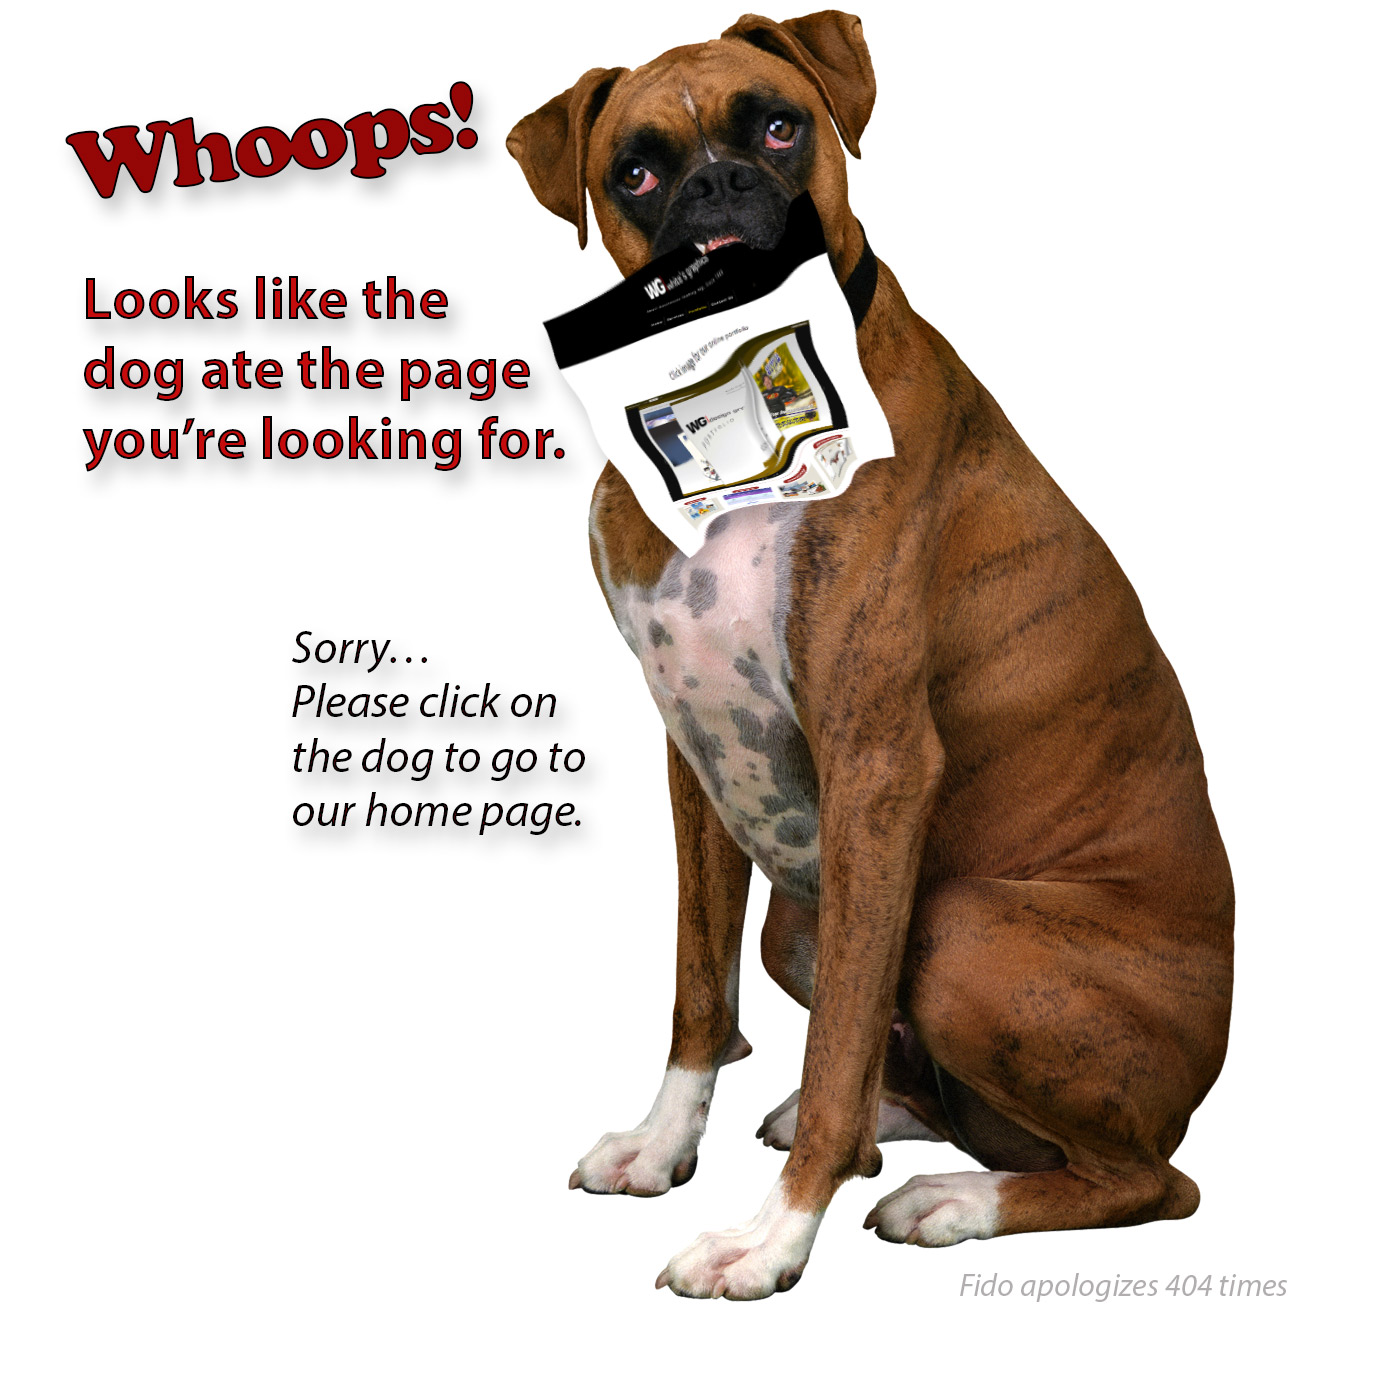 The dog ate the page - 404 error